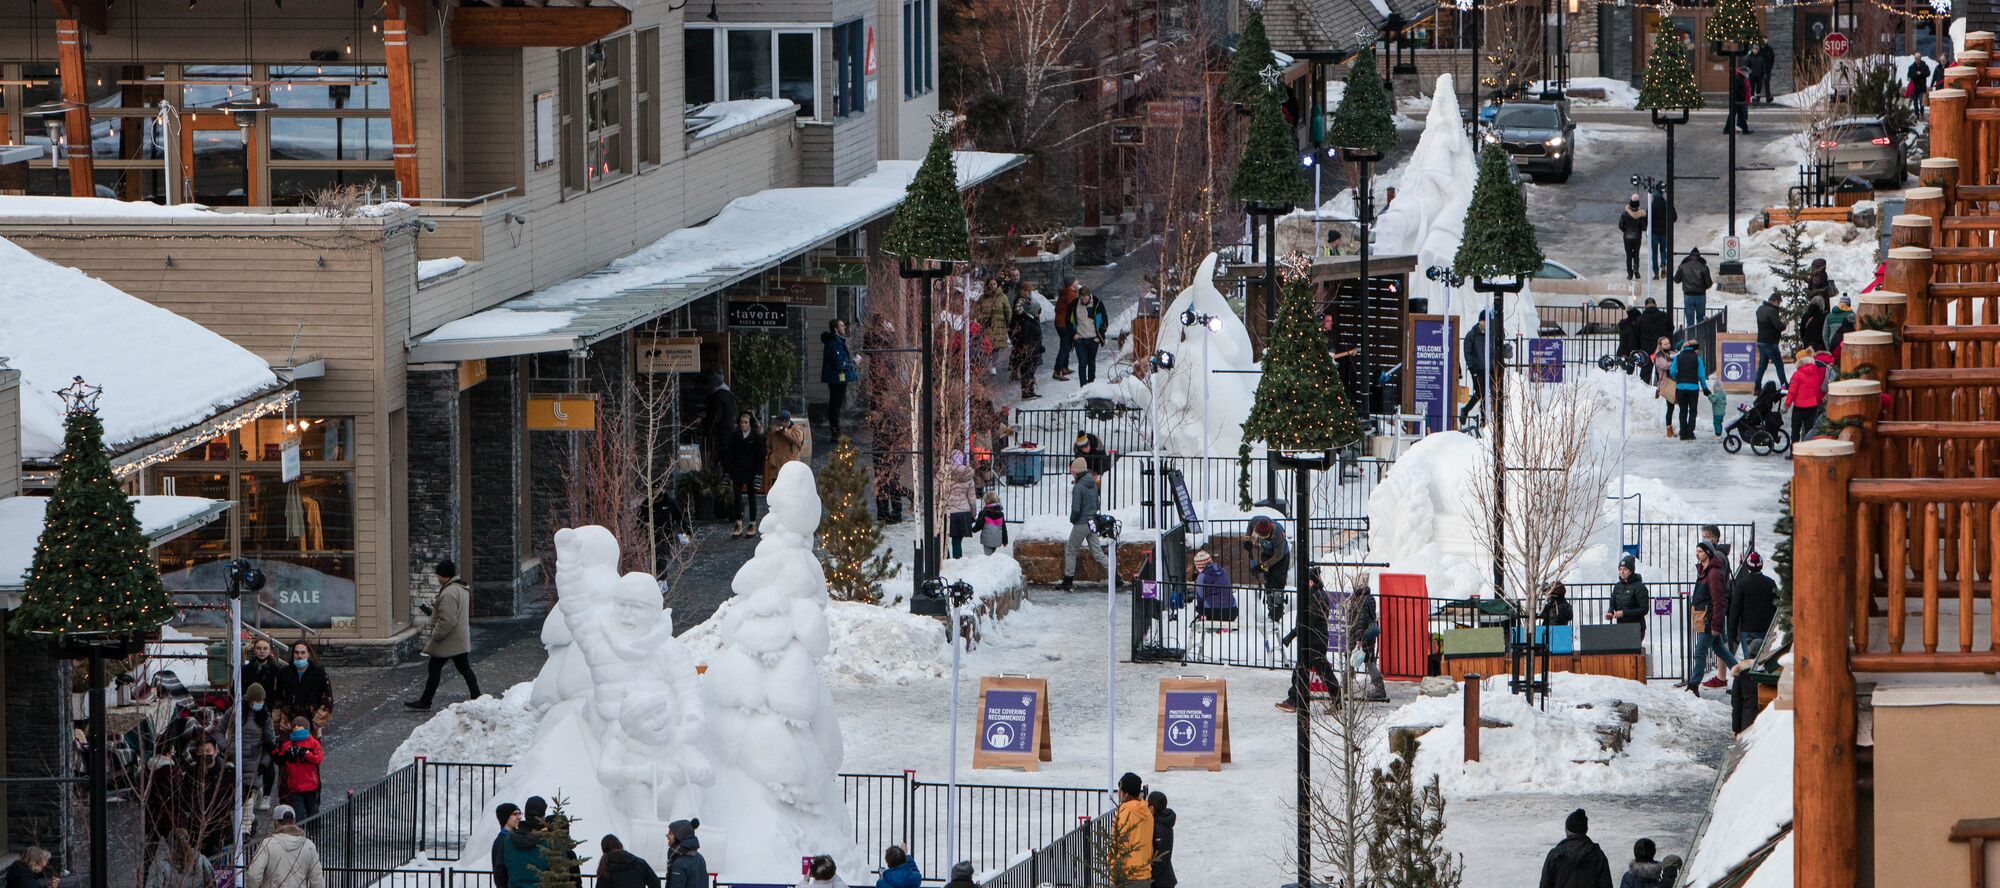 An image showing the snow sculpture exhibition with the snow-capped mountain in the background at SnowDays 2022 at the Town of Banff on a winter day.